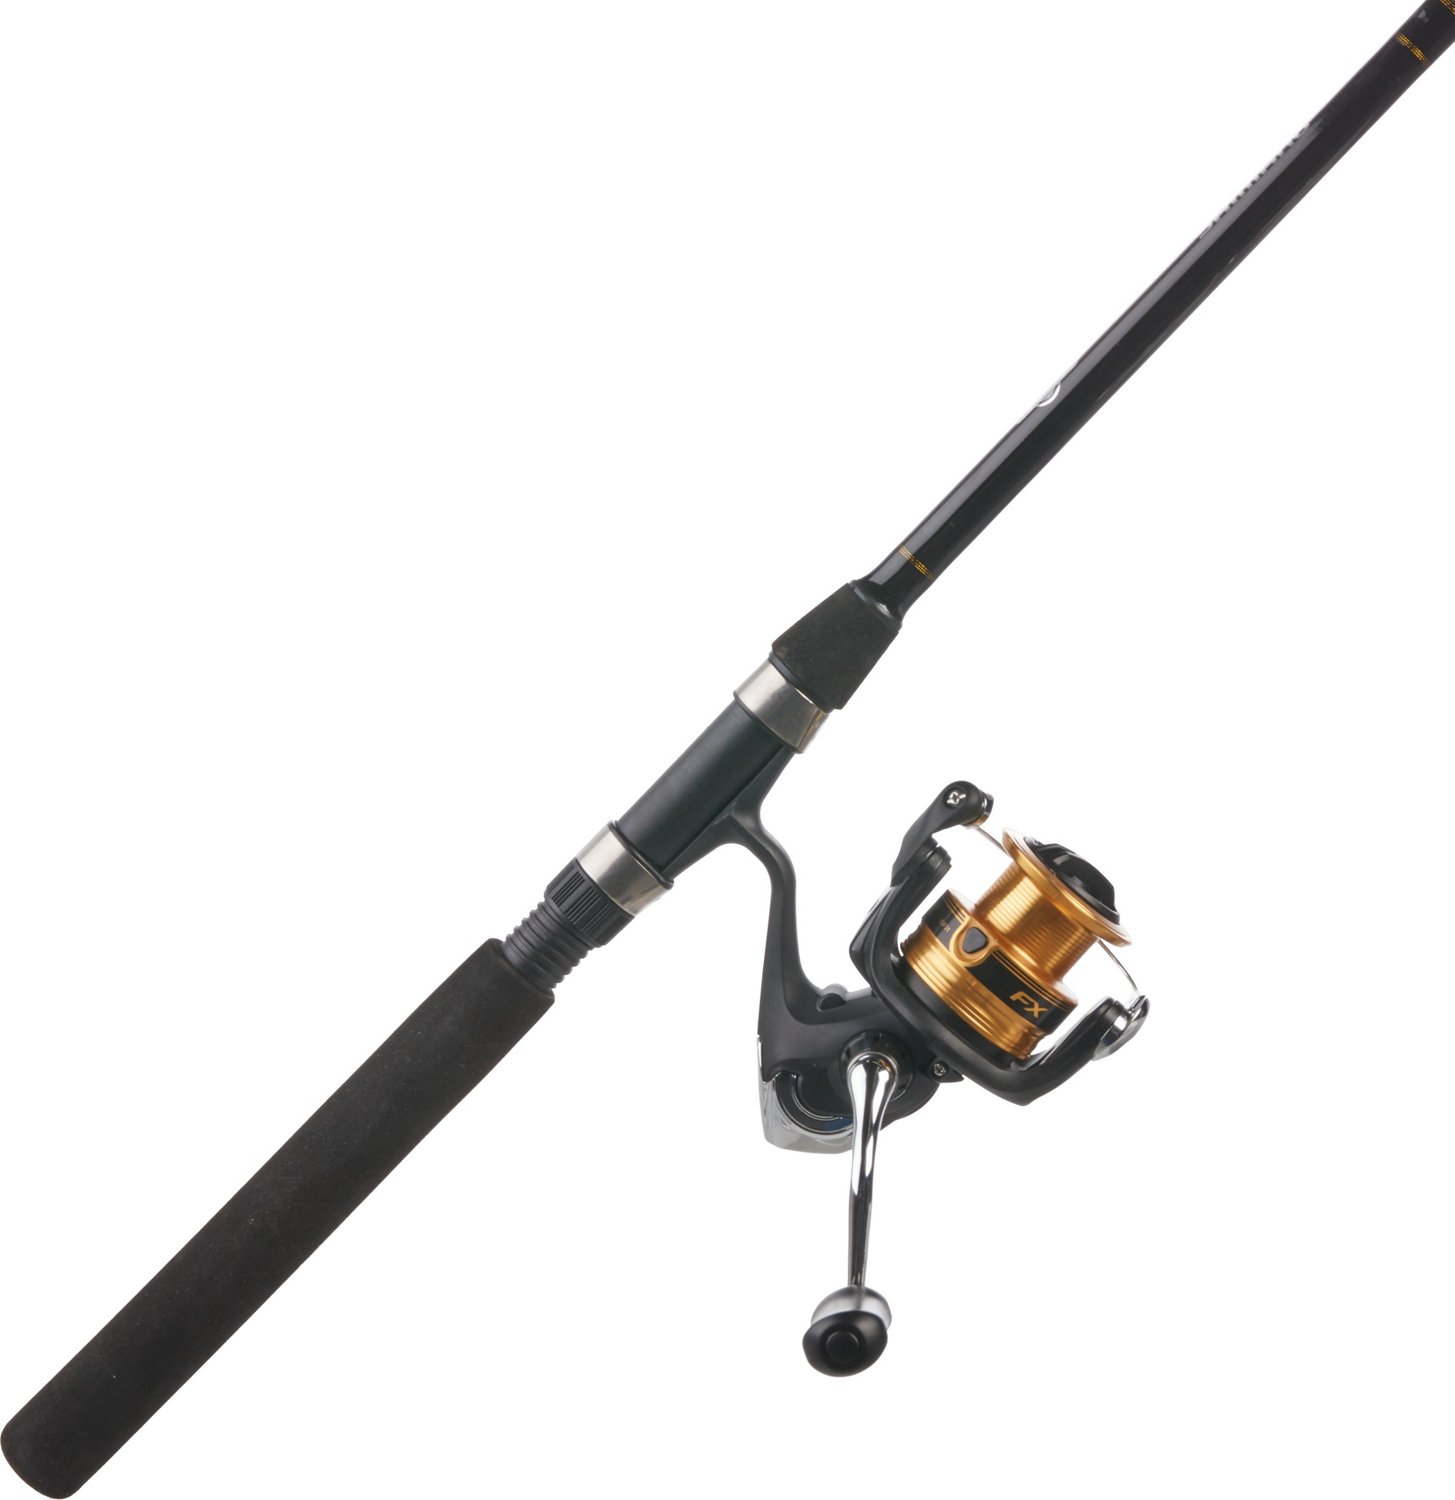 telescopic fishing rod combo 1.8-3 m carbon travel rod with spinning r –  Isaac Sports